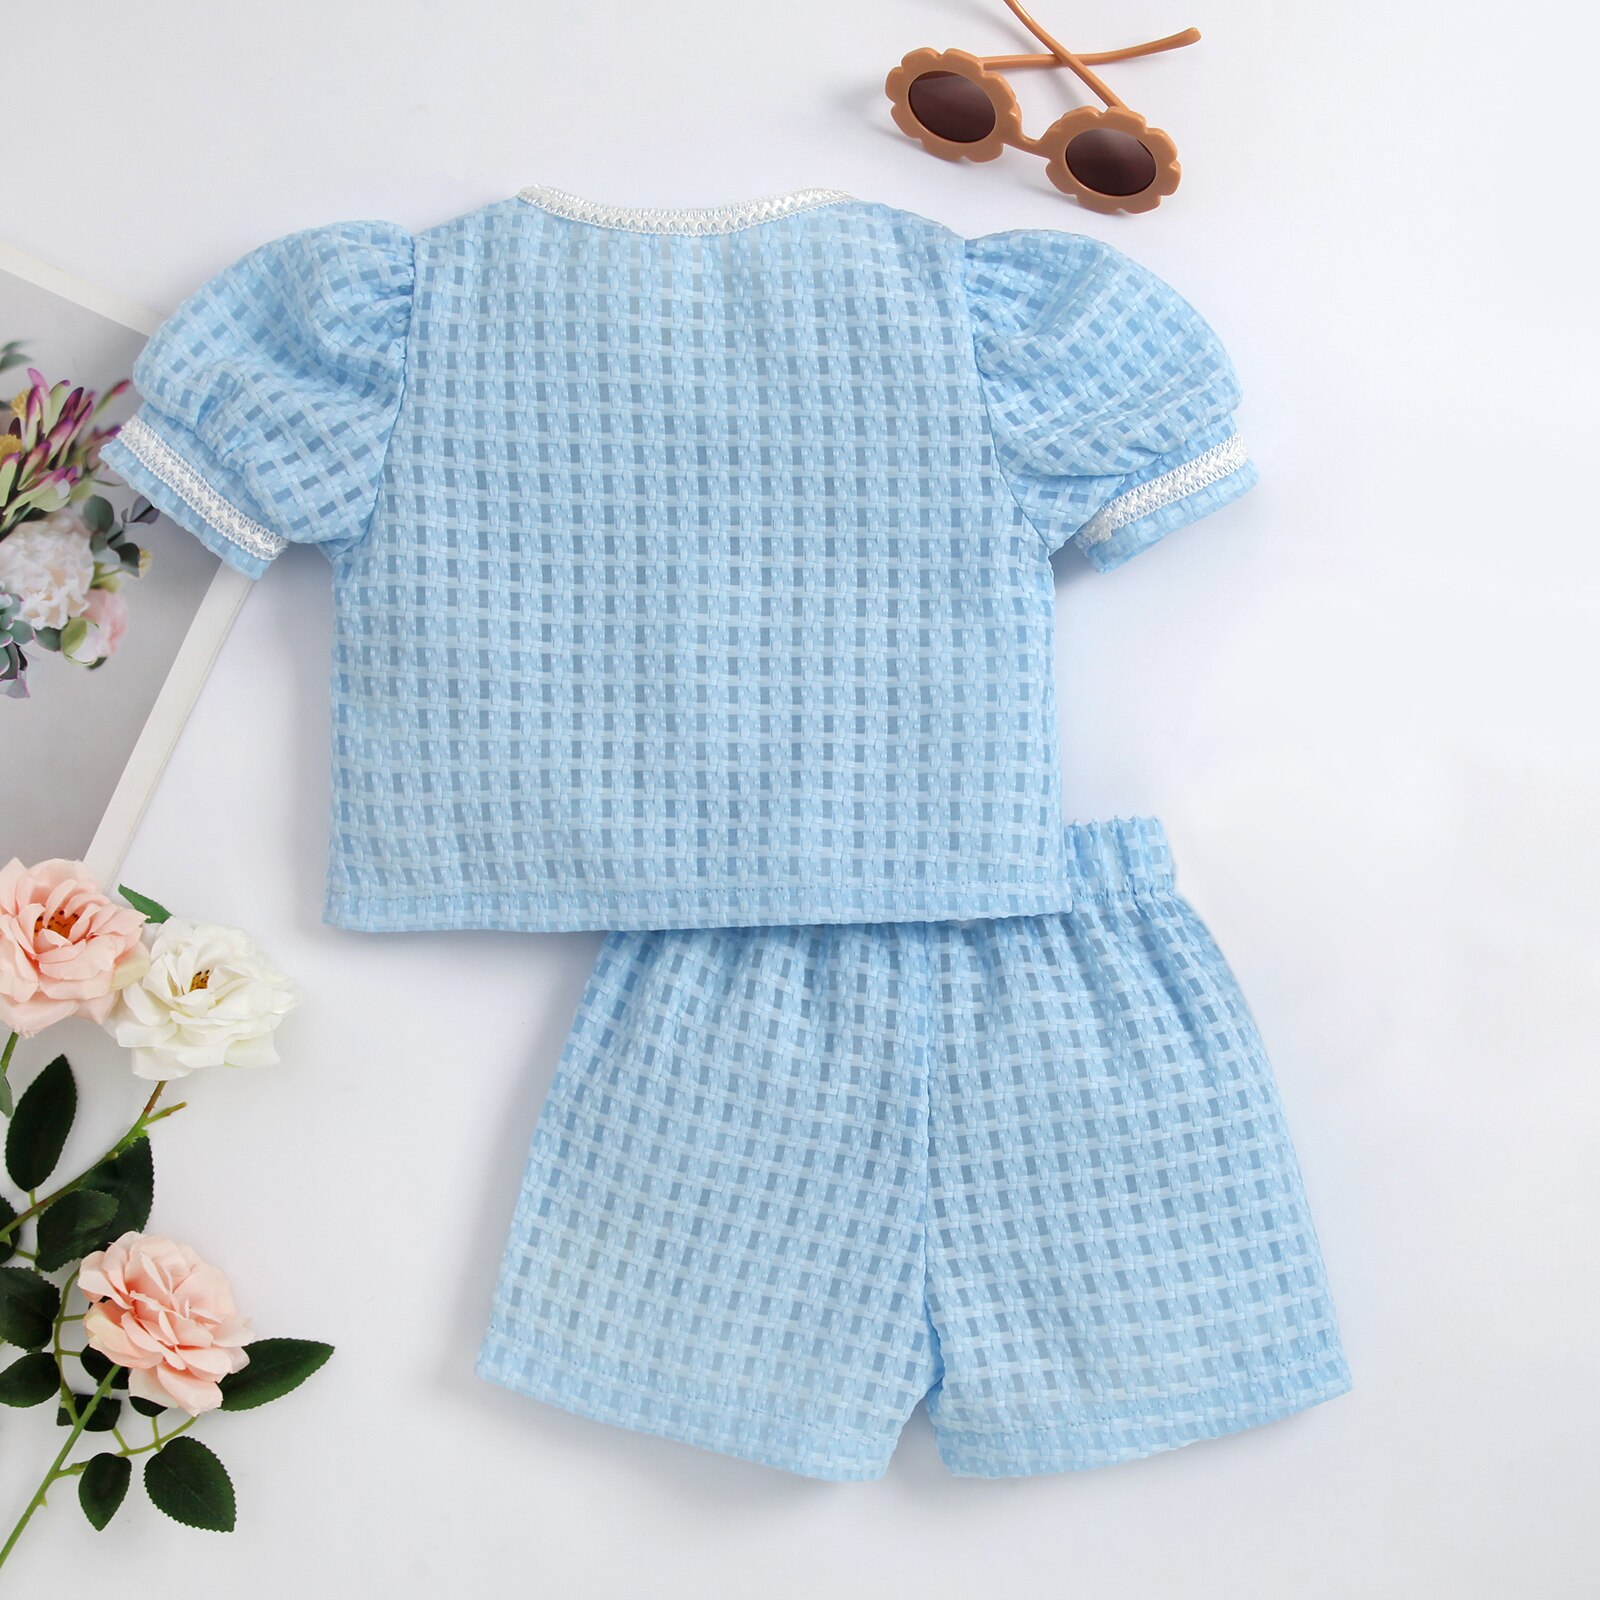 Toddler-Baby-Girl-Elegant-Two-Piece-Outfit-Set-Summer-Textured-Pattern-Pearls-Puff-Sleeve-Tops-Buttons-1